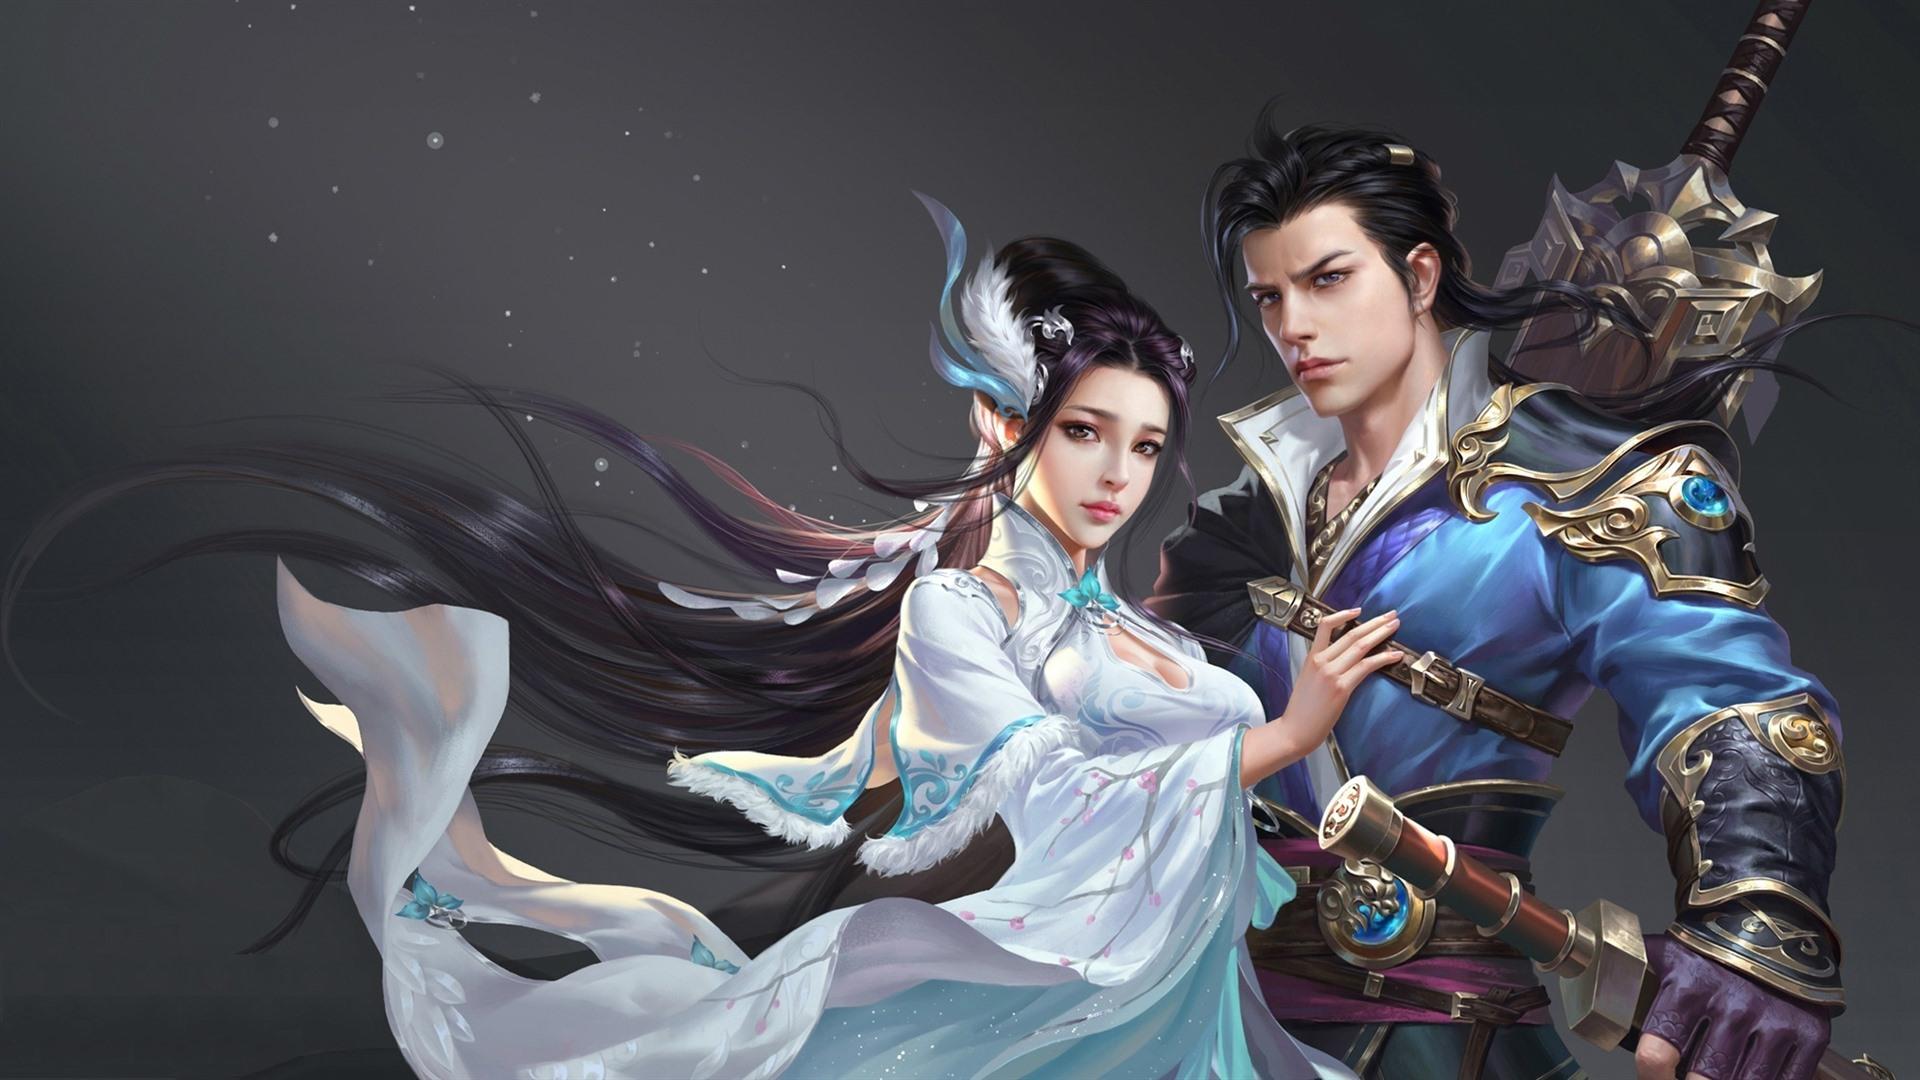 Wallpapers Fantasy Chinese girl and boy, art picture 1920x1080 Full HD 2K Picture, Image